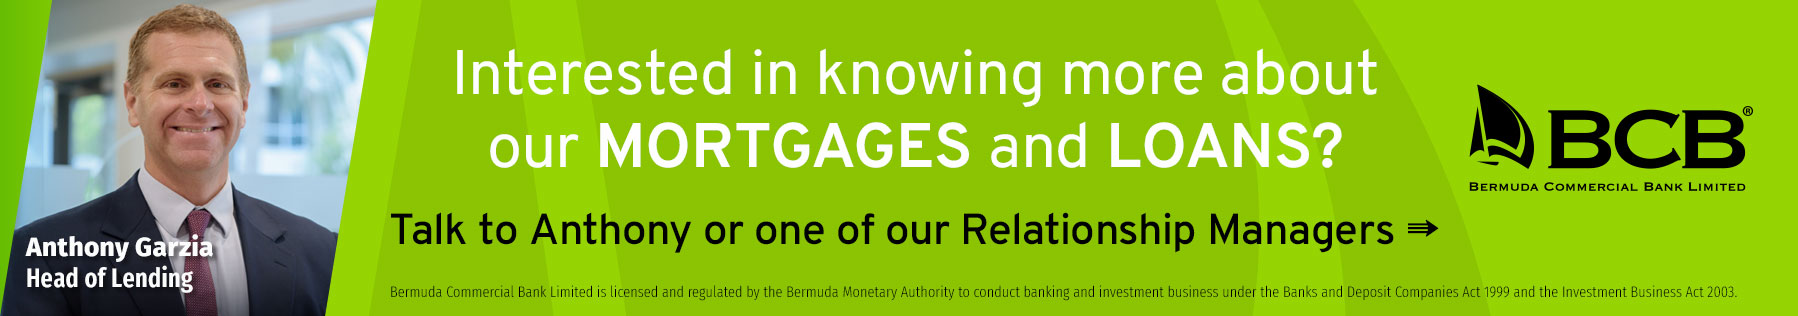 Know more about our mortgages and loans